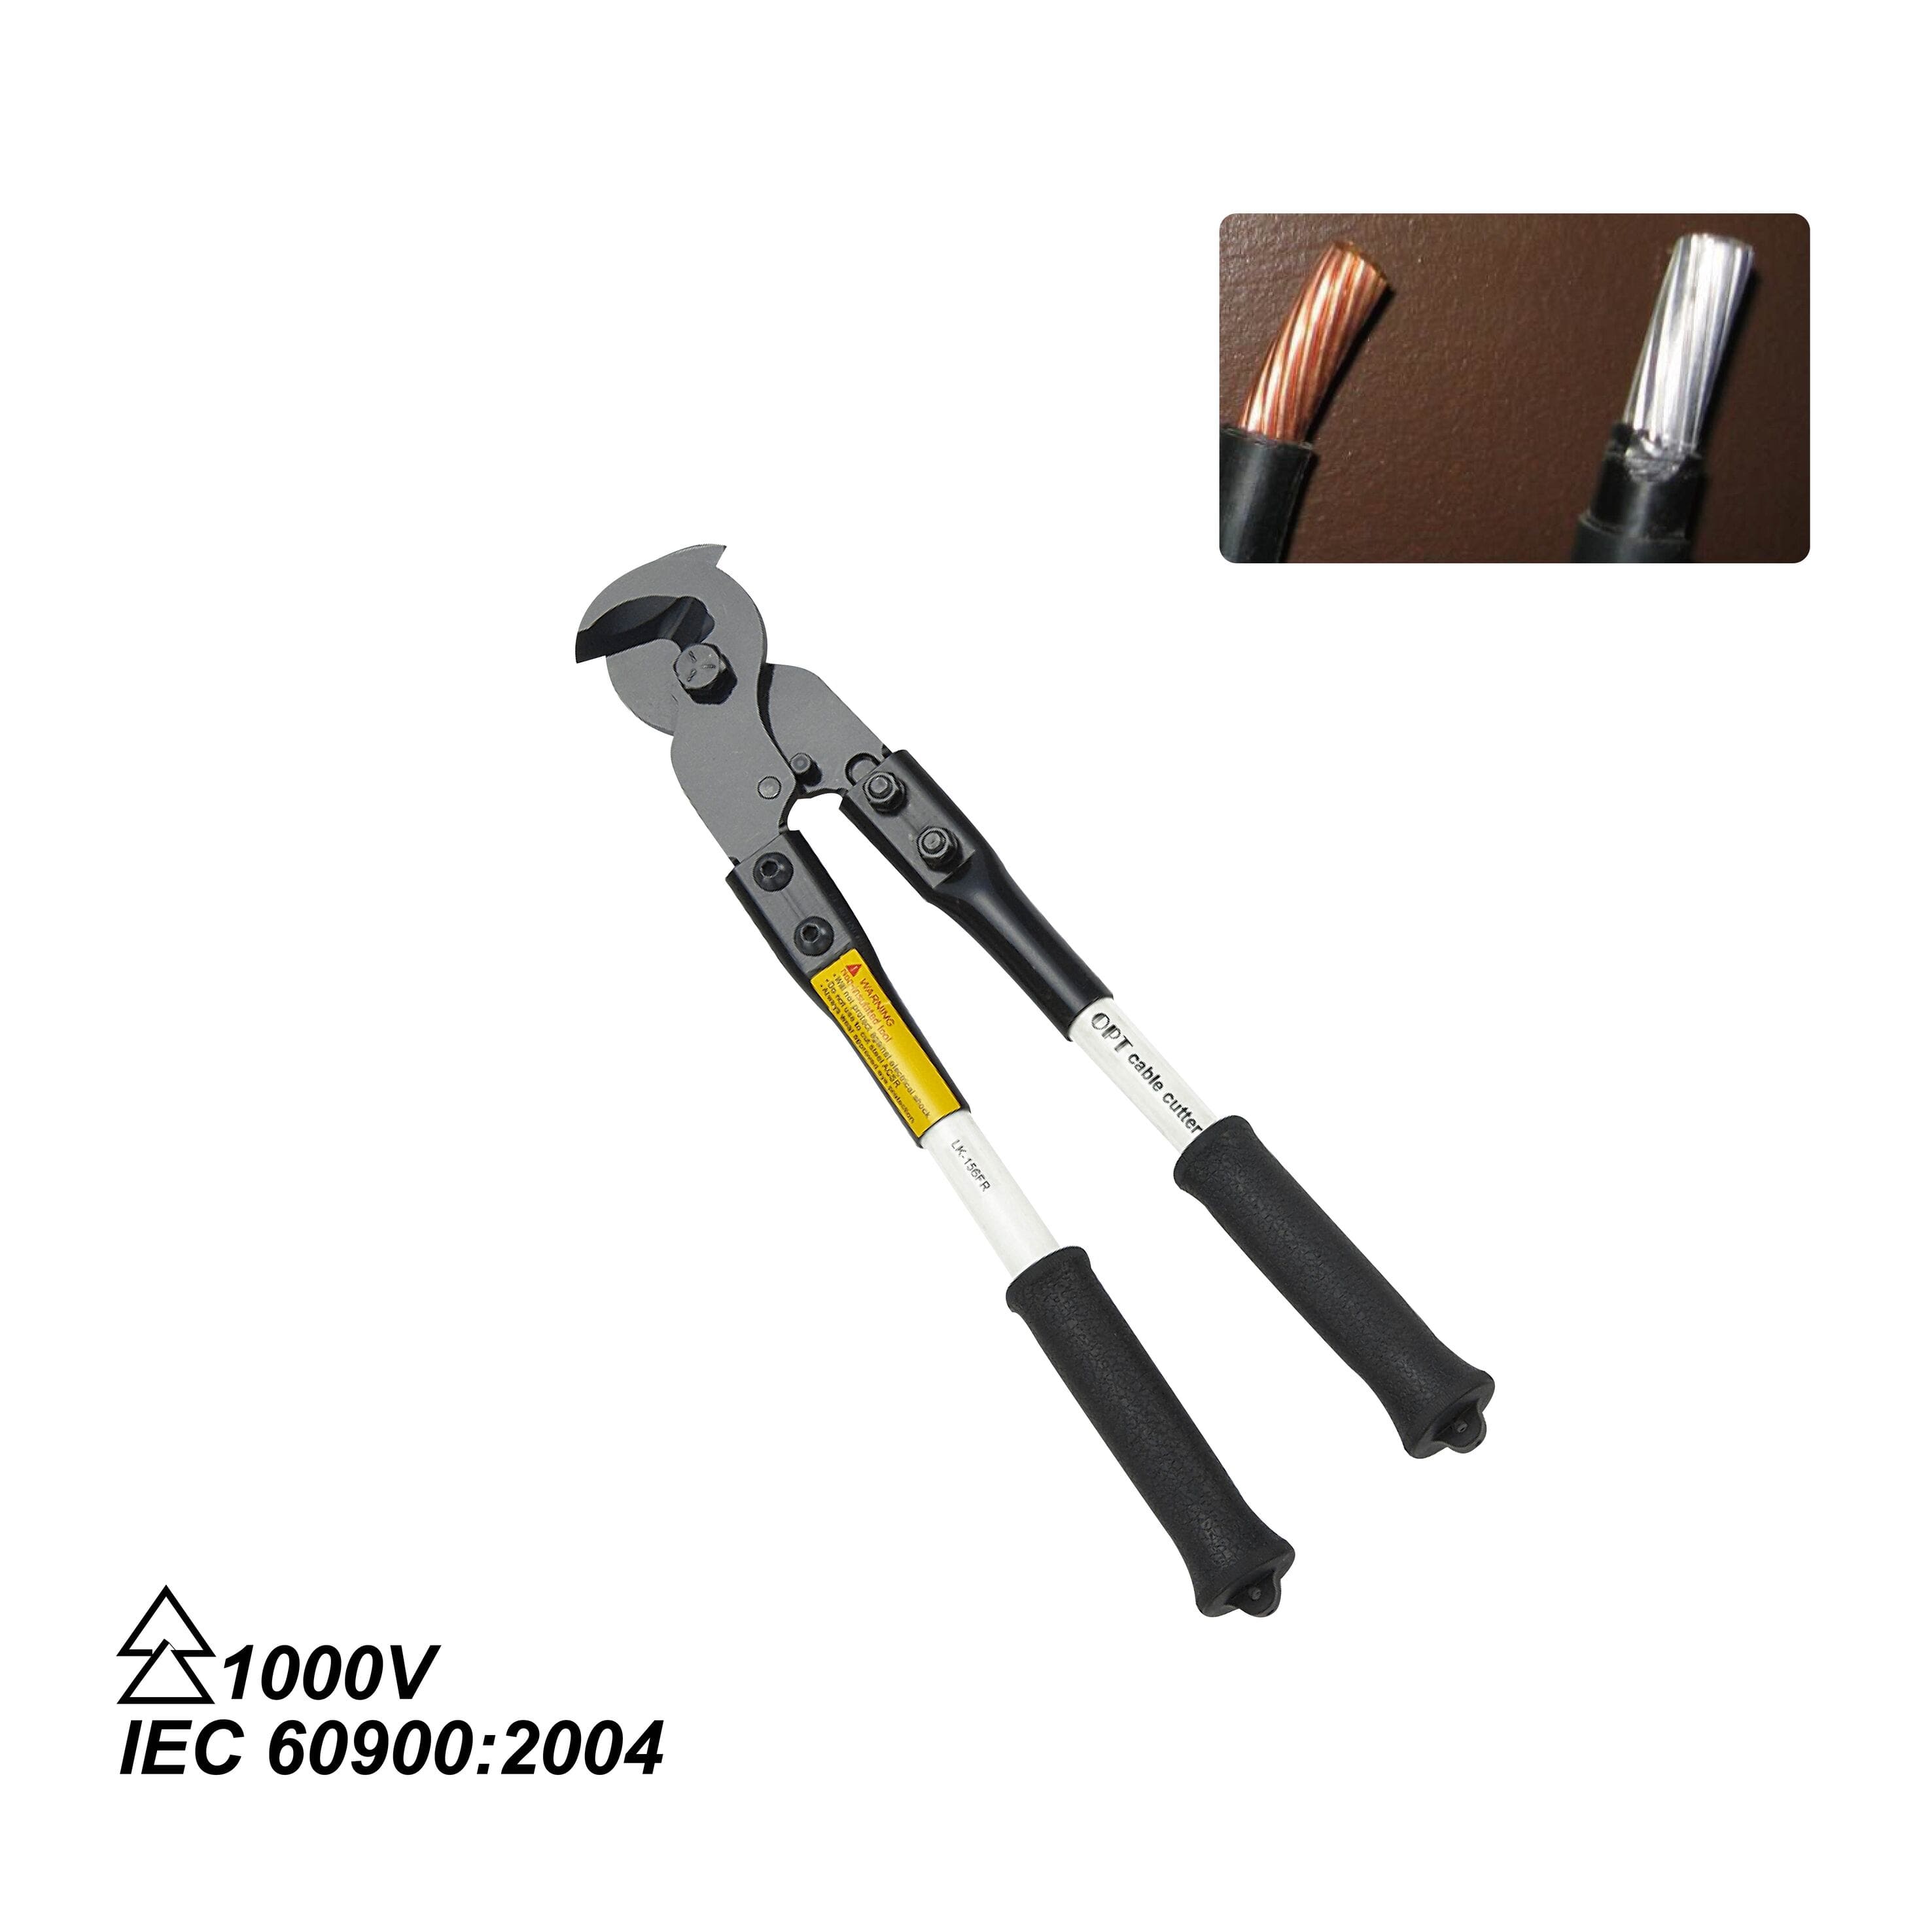 LK-156FR HAND CABLE CUTTERS